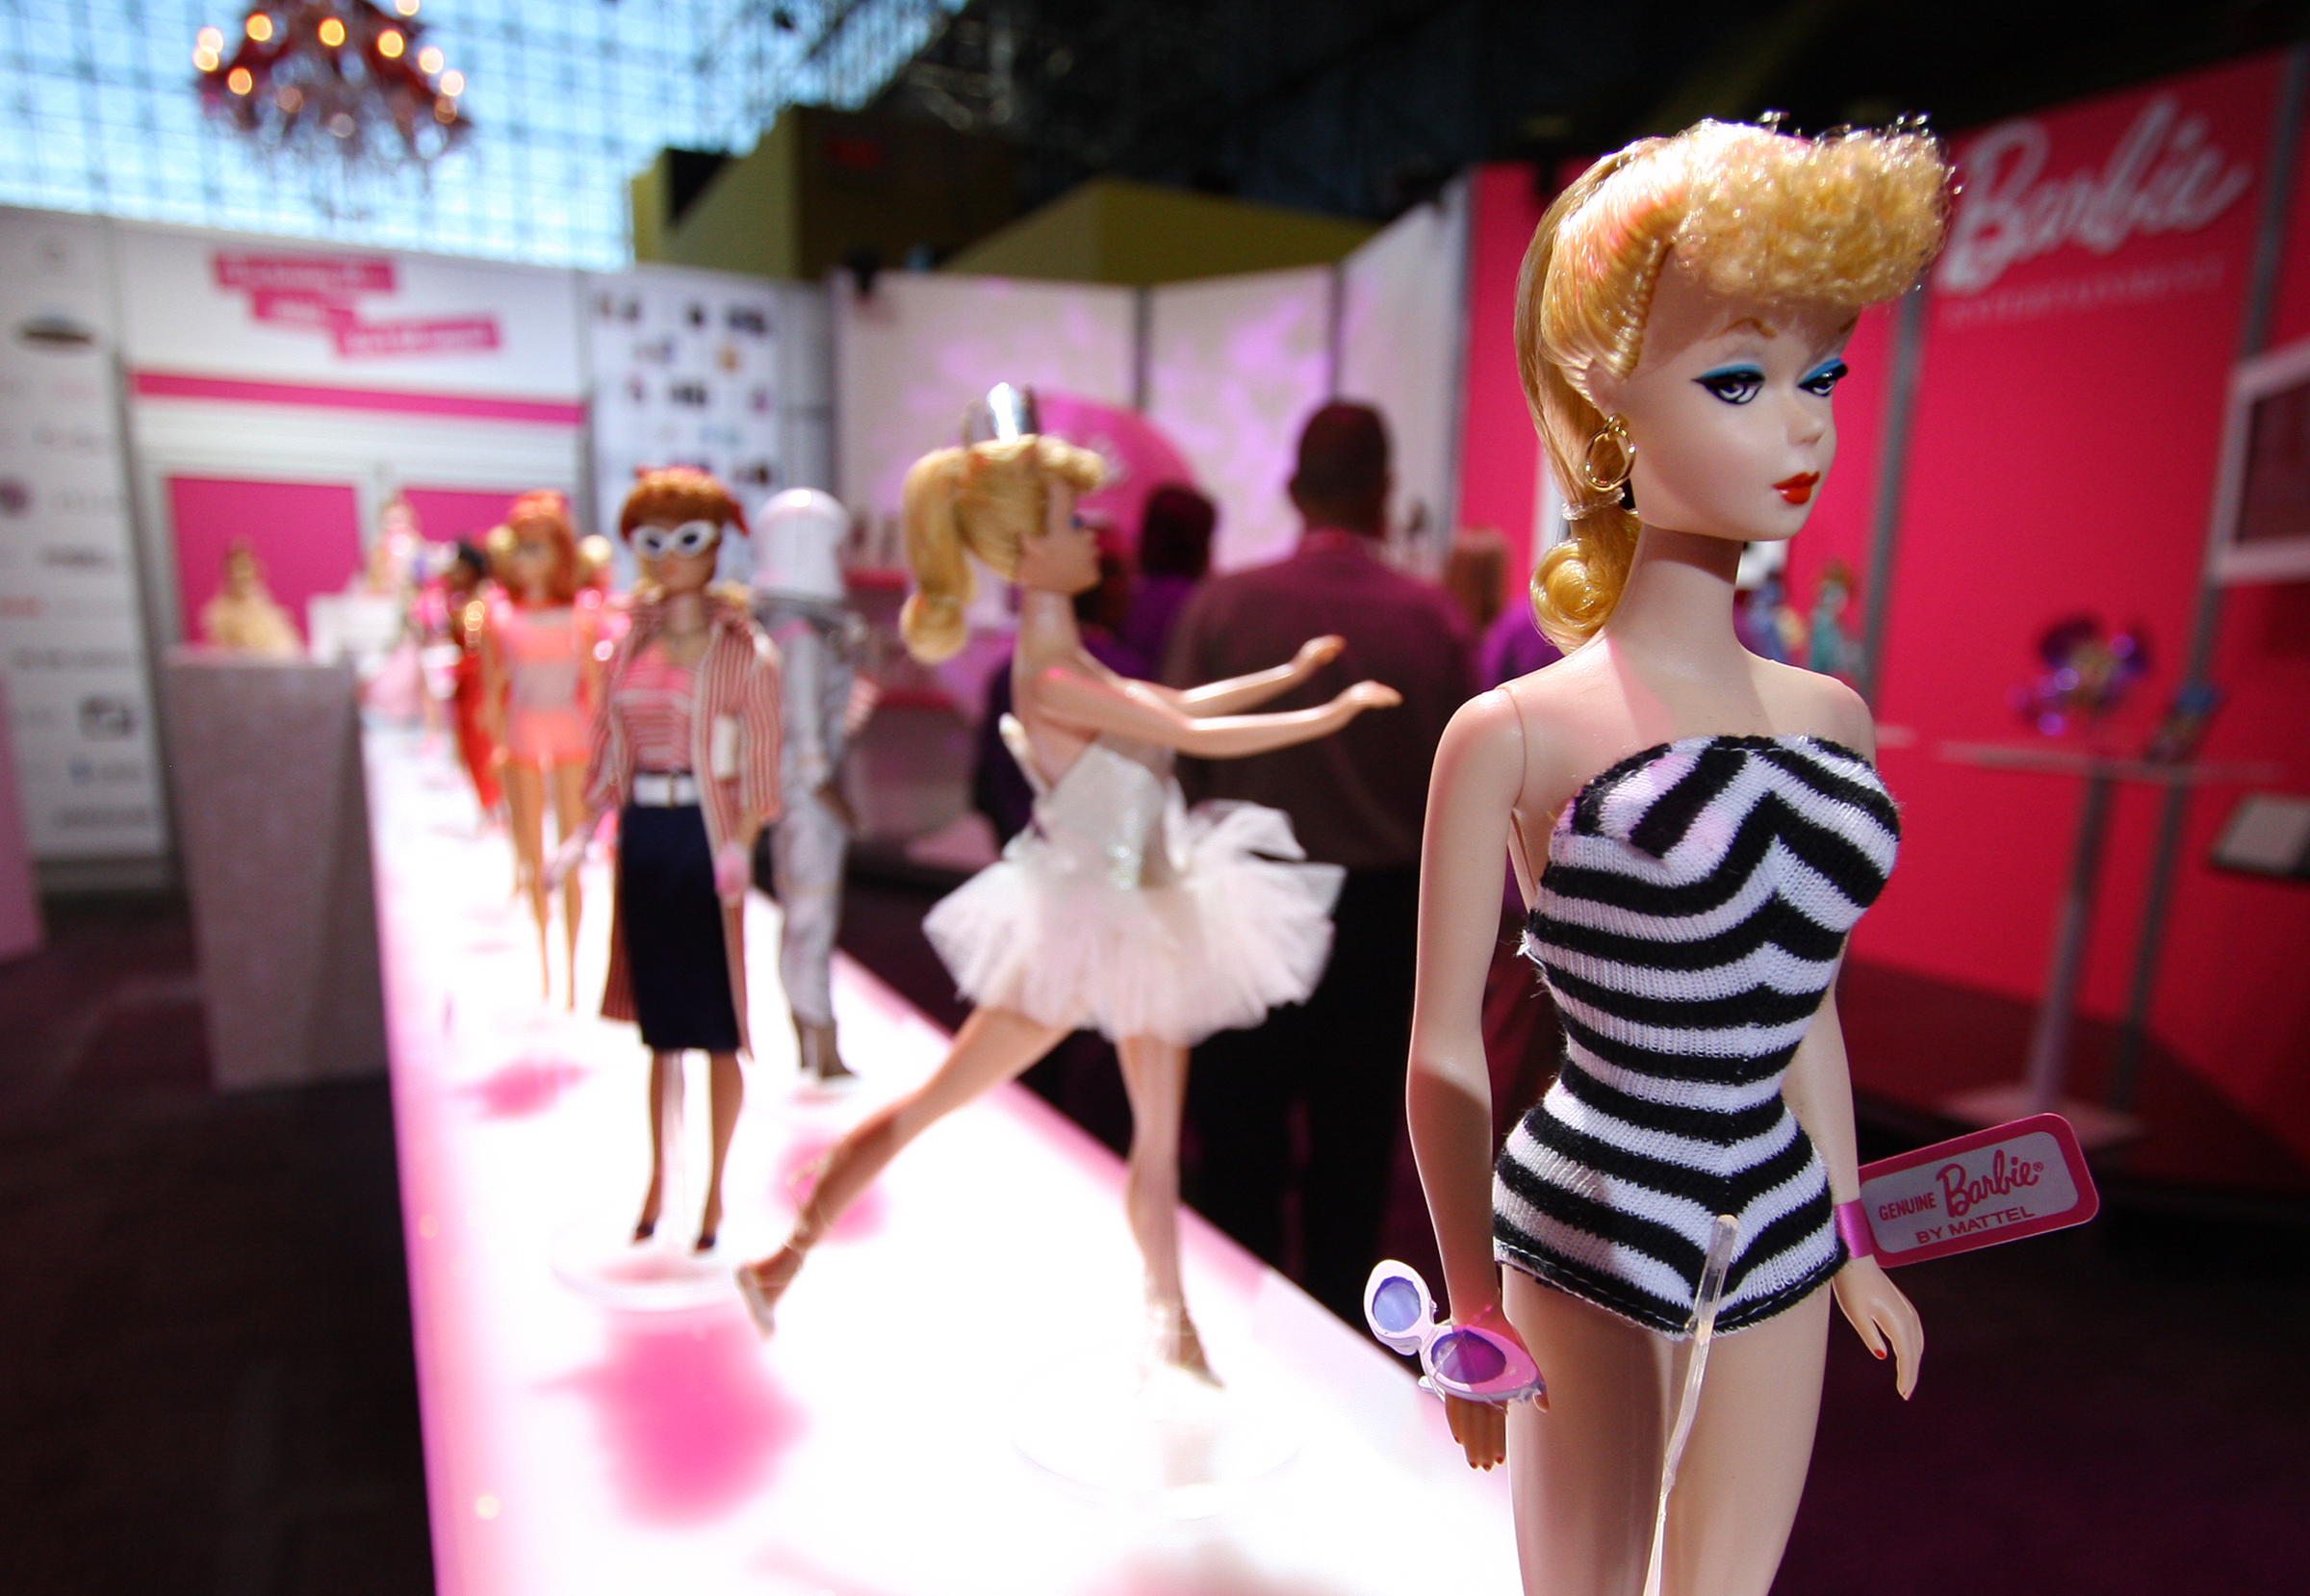 The legacy of Barbie: What does Barbie represent today? – Deseret News